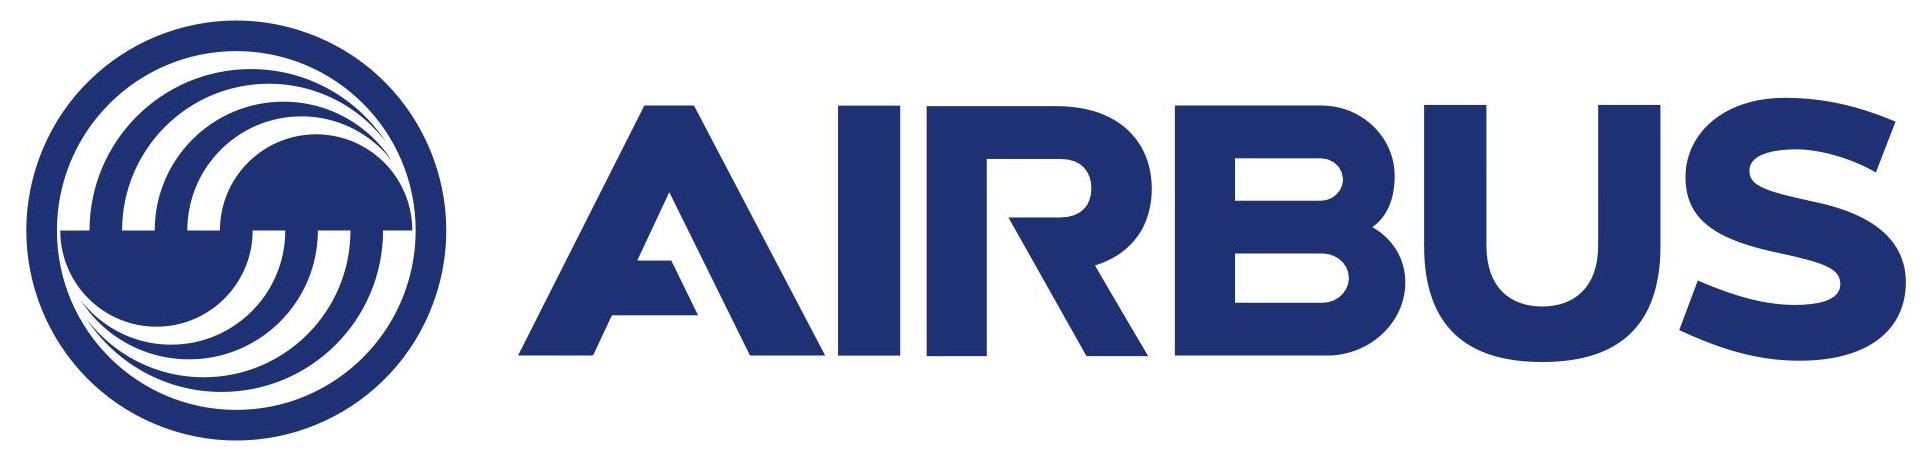 Airbus is a leading aircraft manufacturer, with the most modern andcomprehensive aircraft family., Airbus Logo Vector PNG - Free PNG